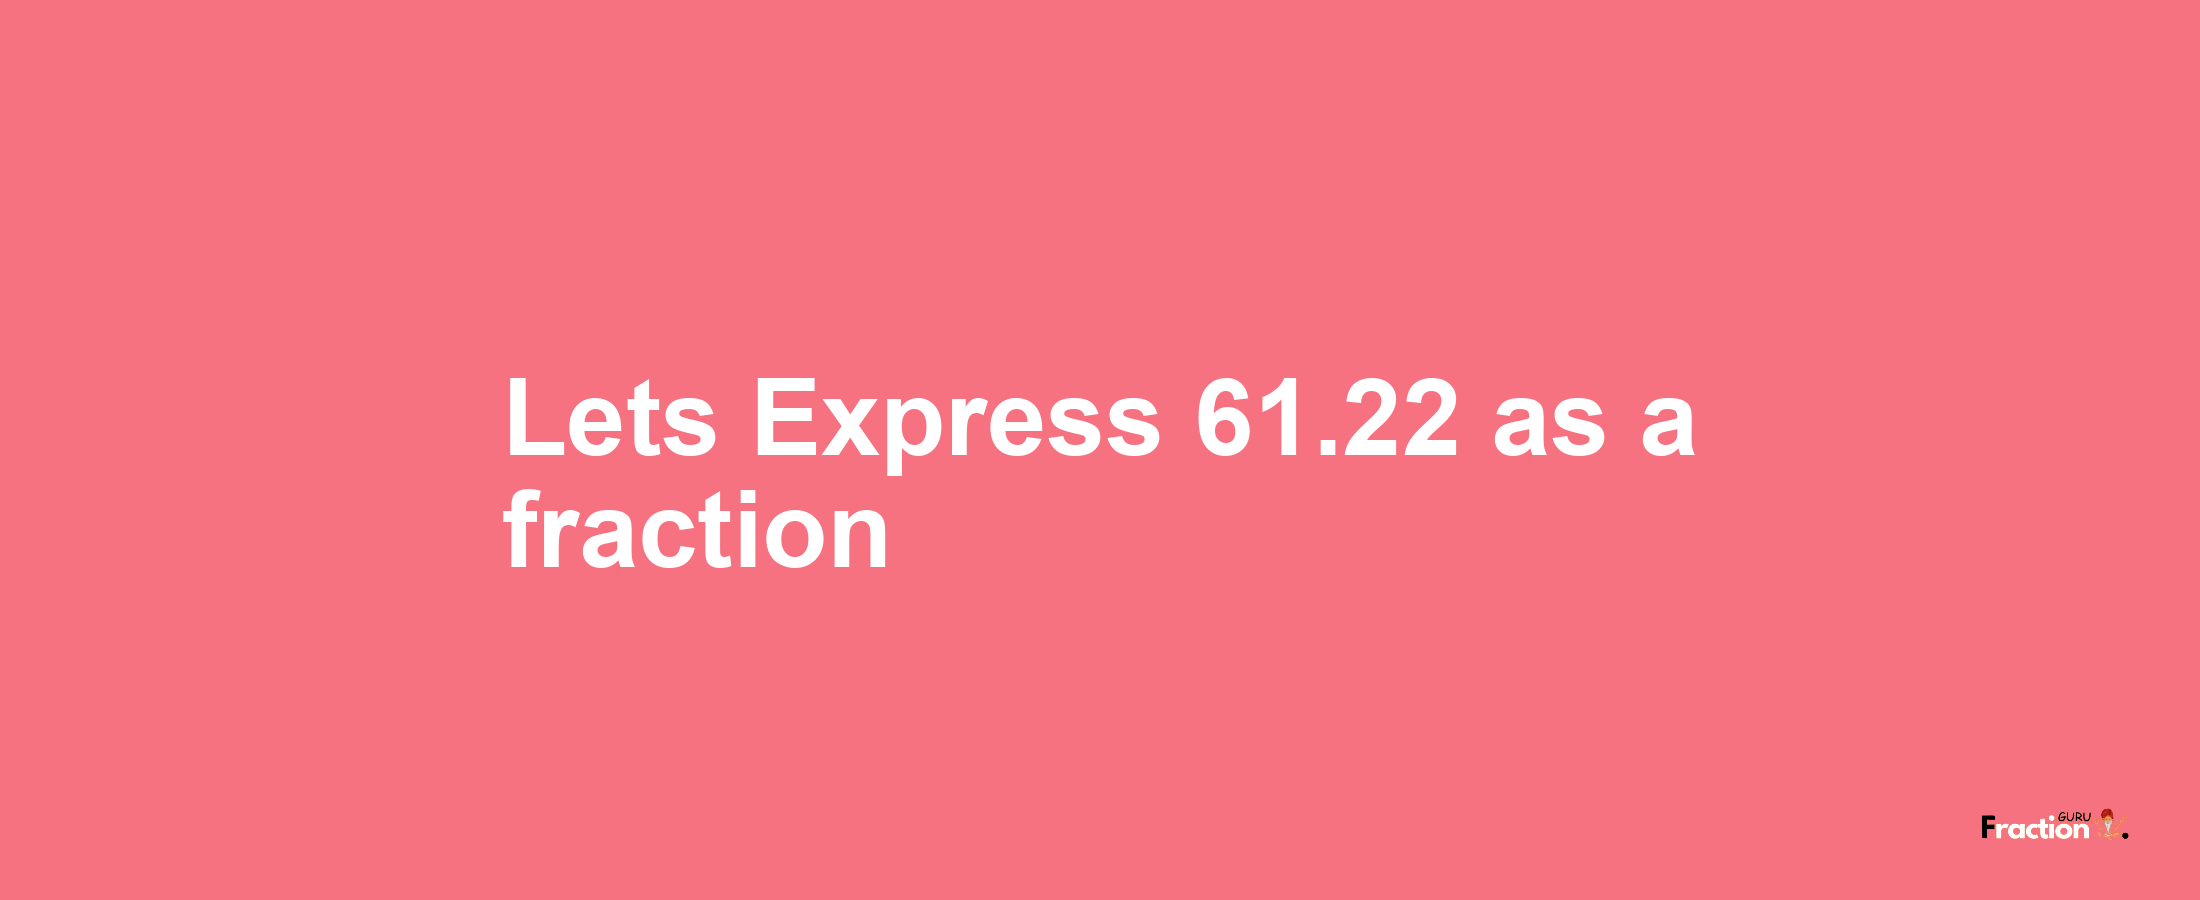 Lets Express 61.22 as afraction